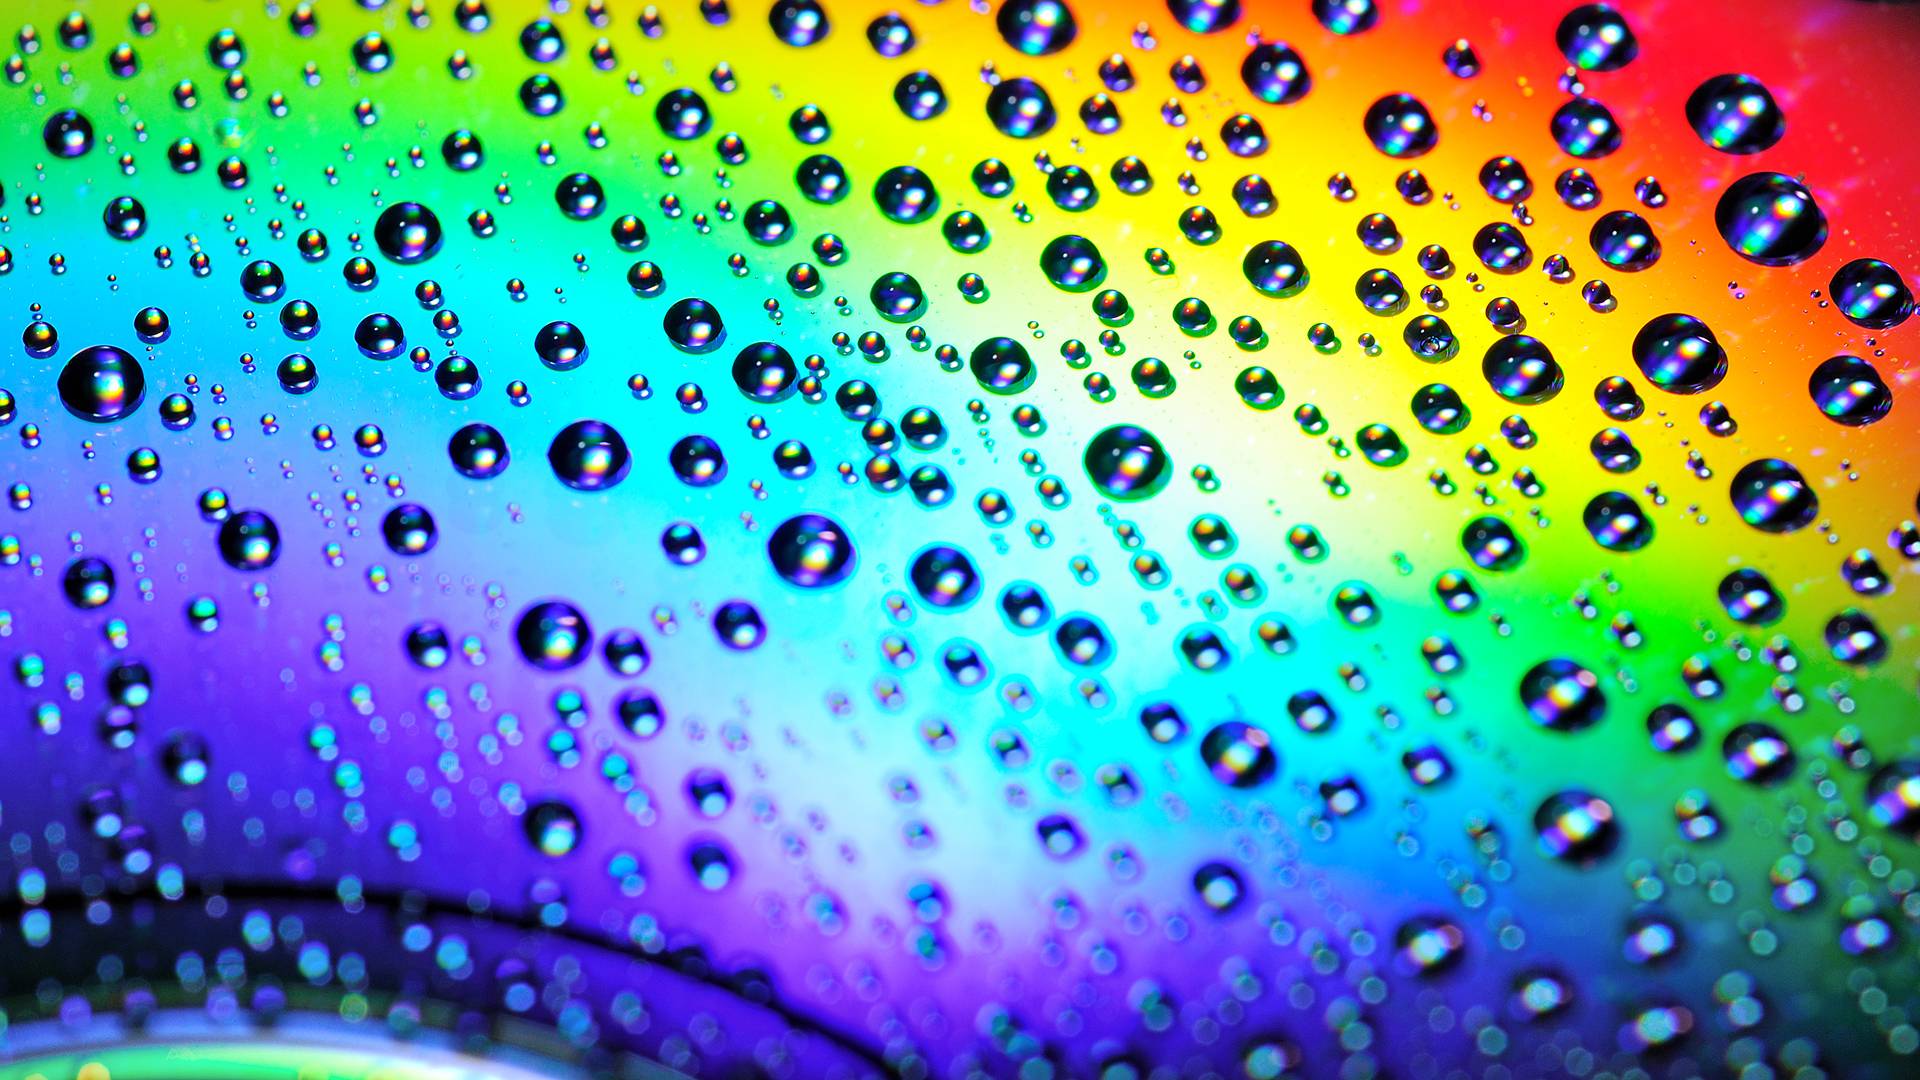 Download Abstract Rainbow Drops Bright Water Wallpaper 1920x1080